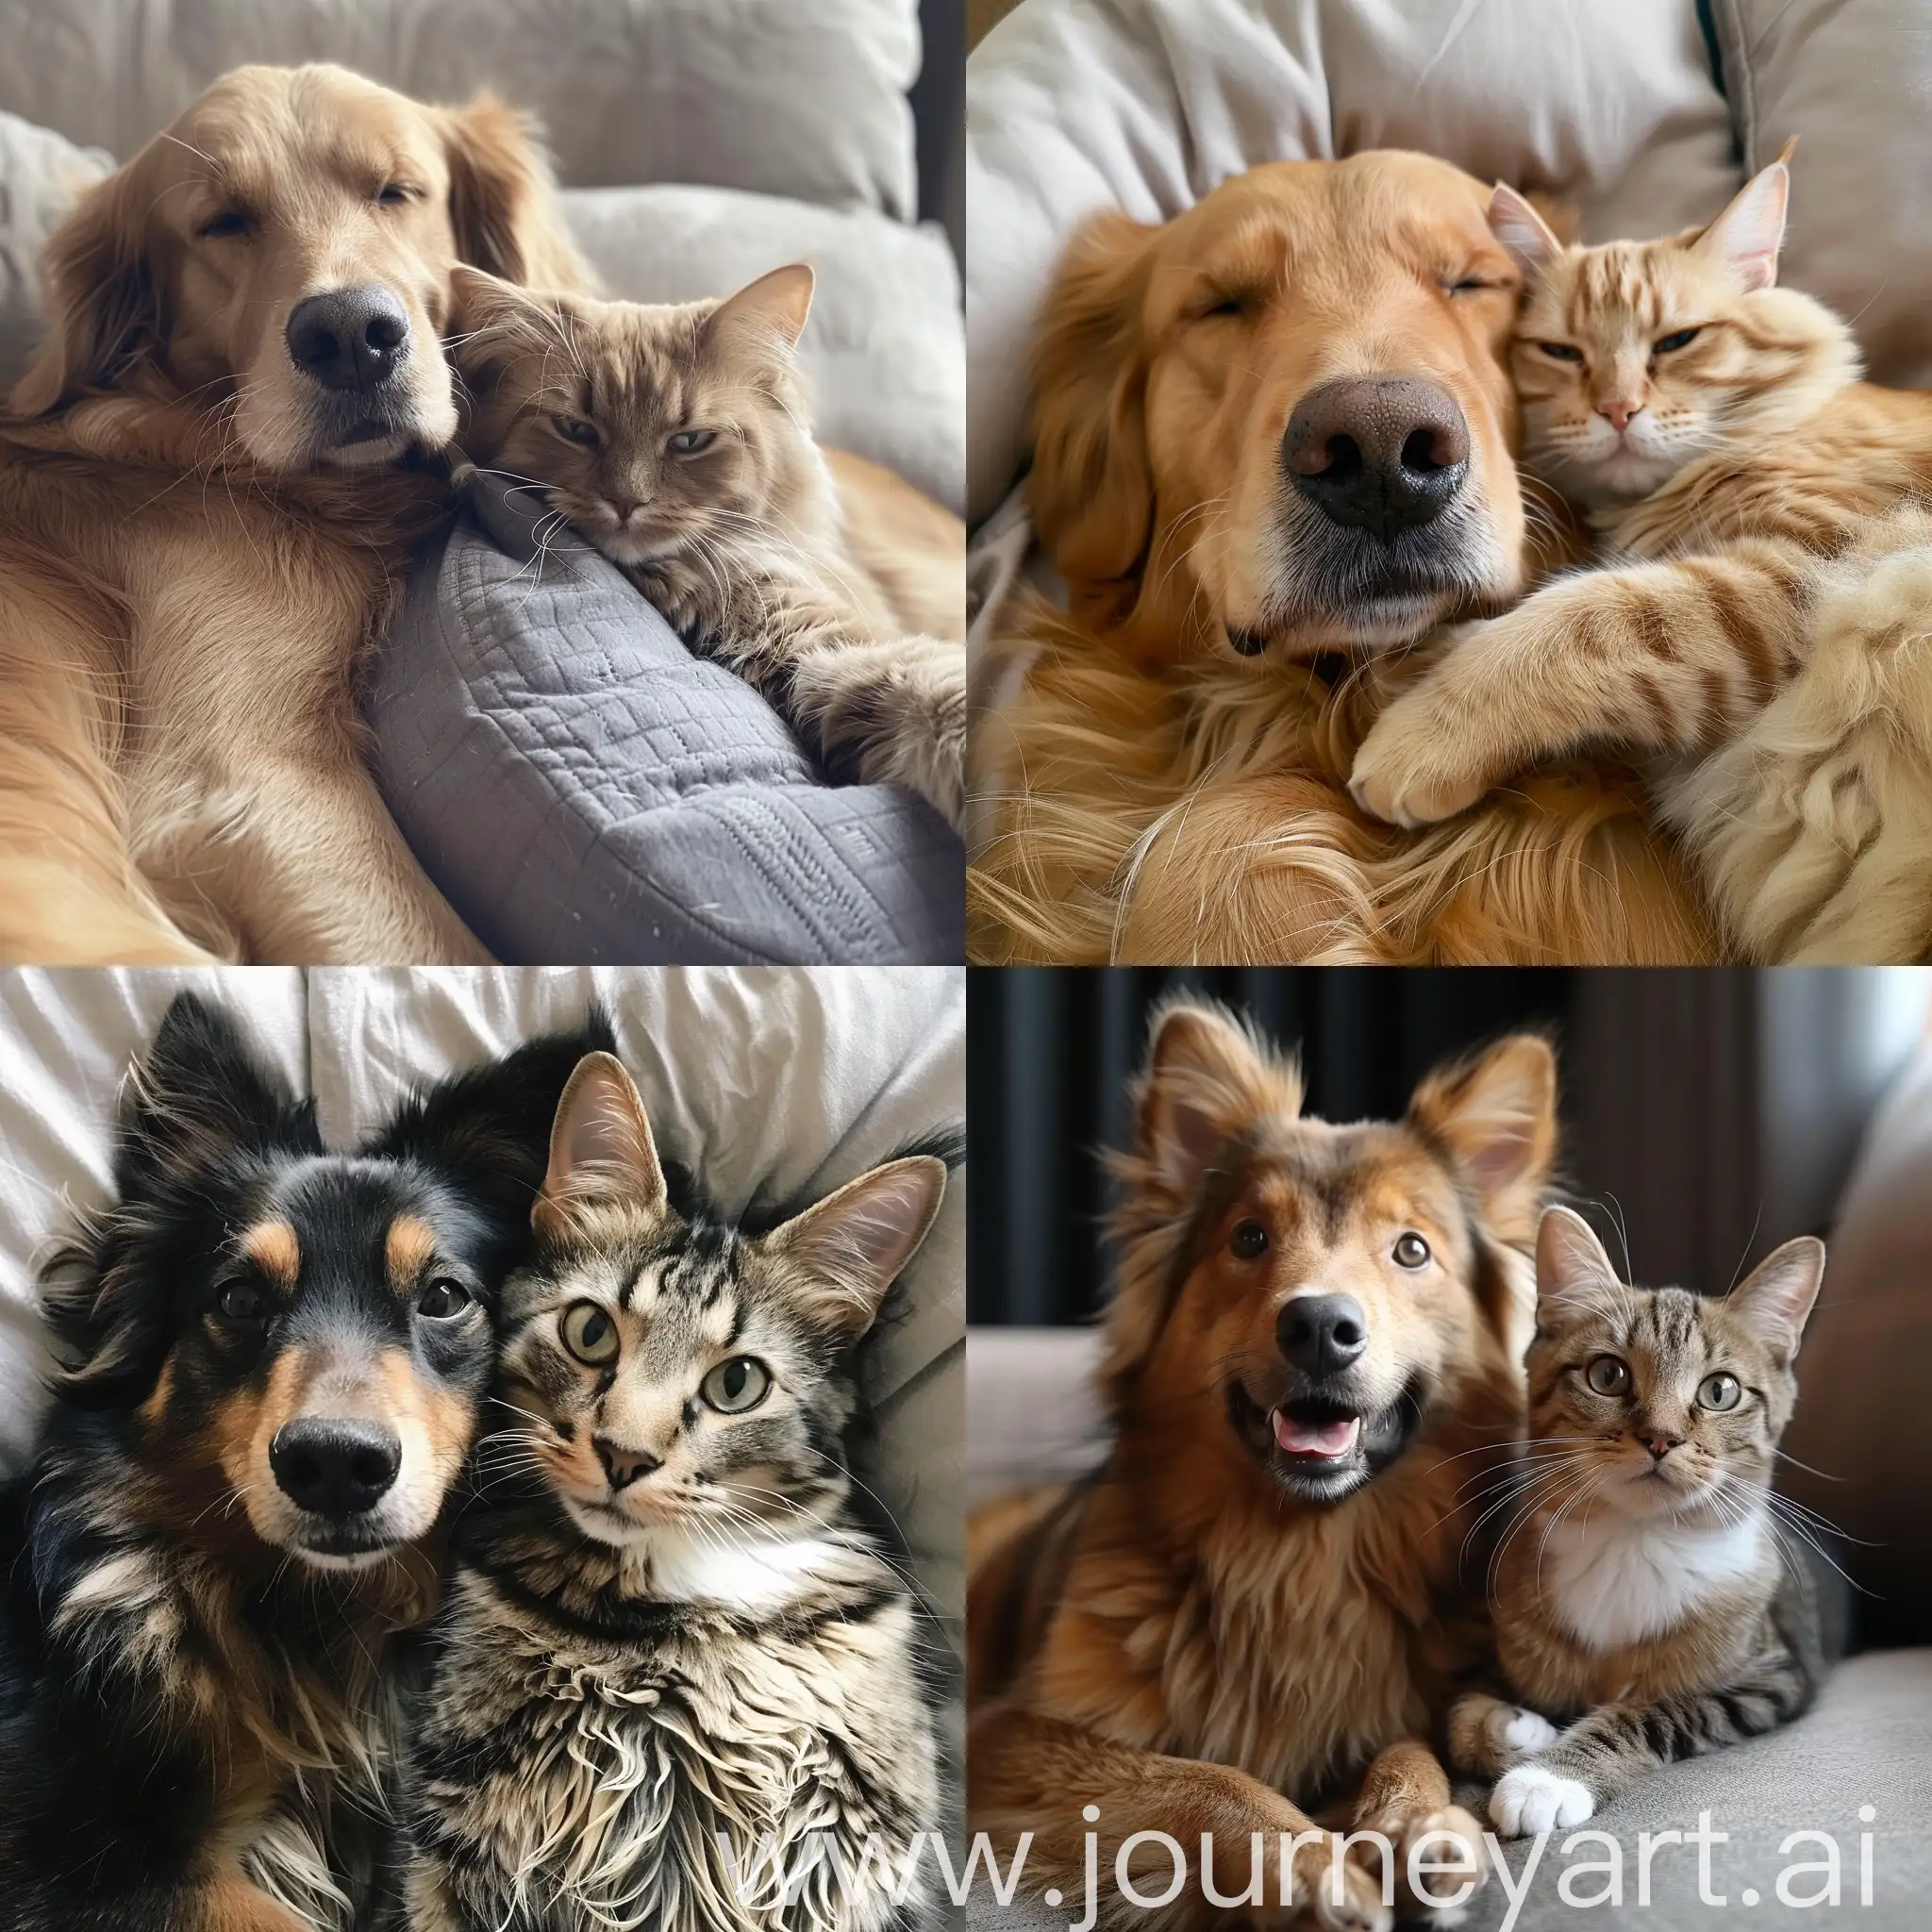 Adorable-Dog-and-Cat-Playful-Interaction